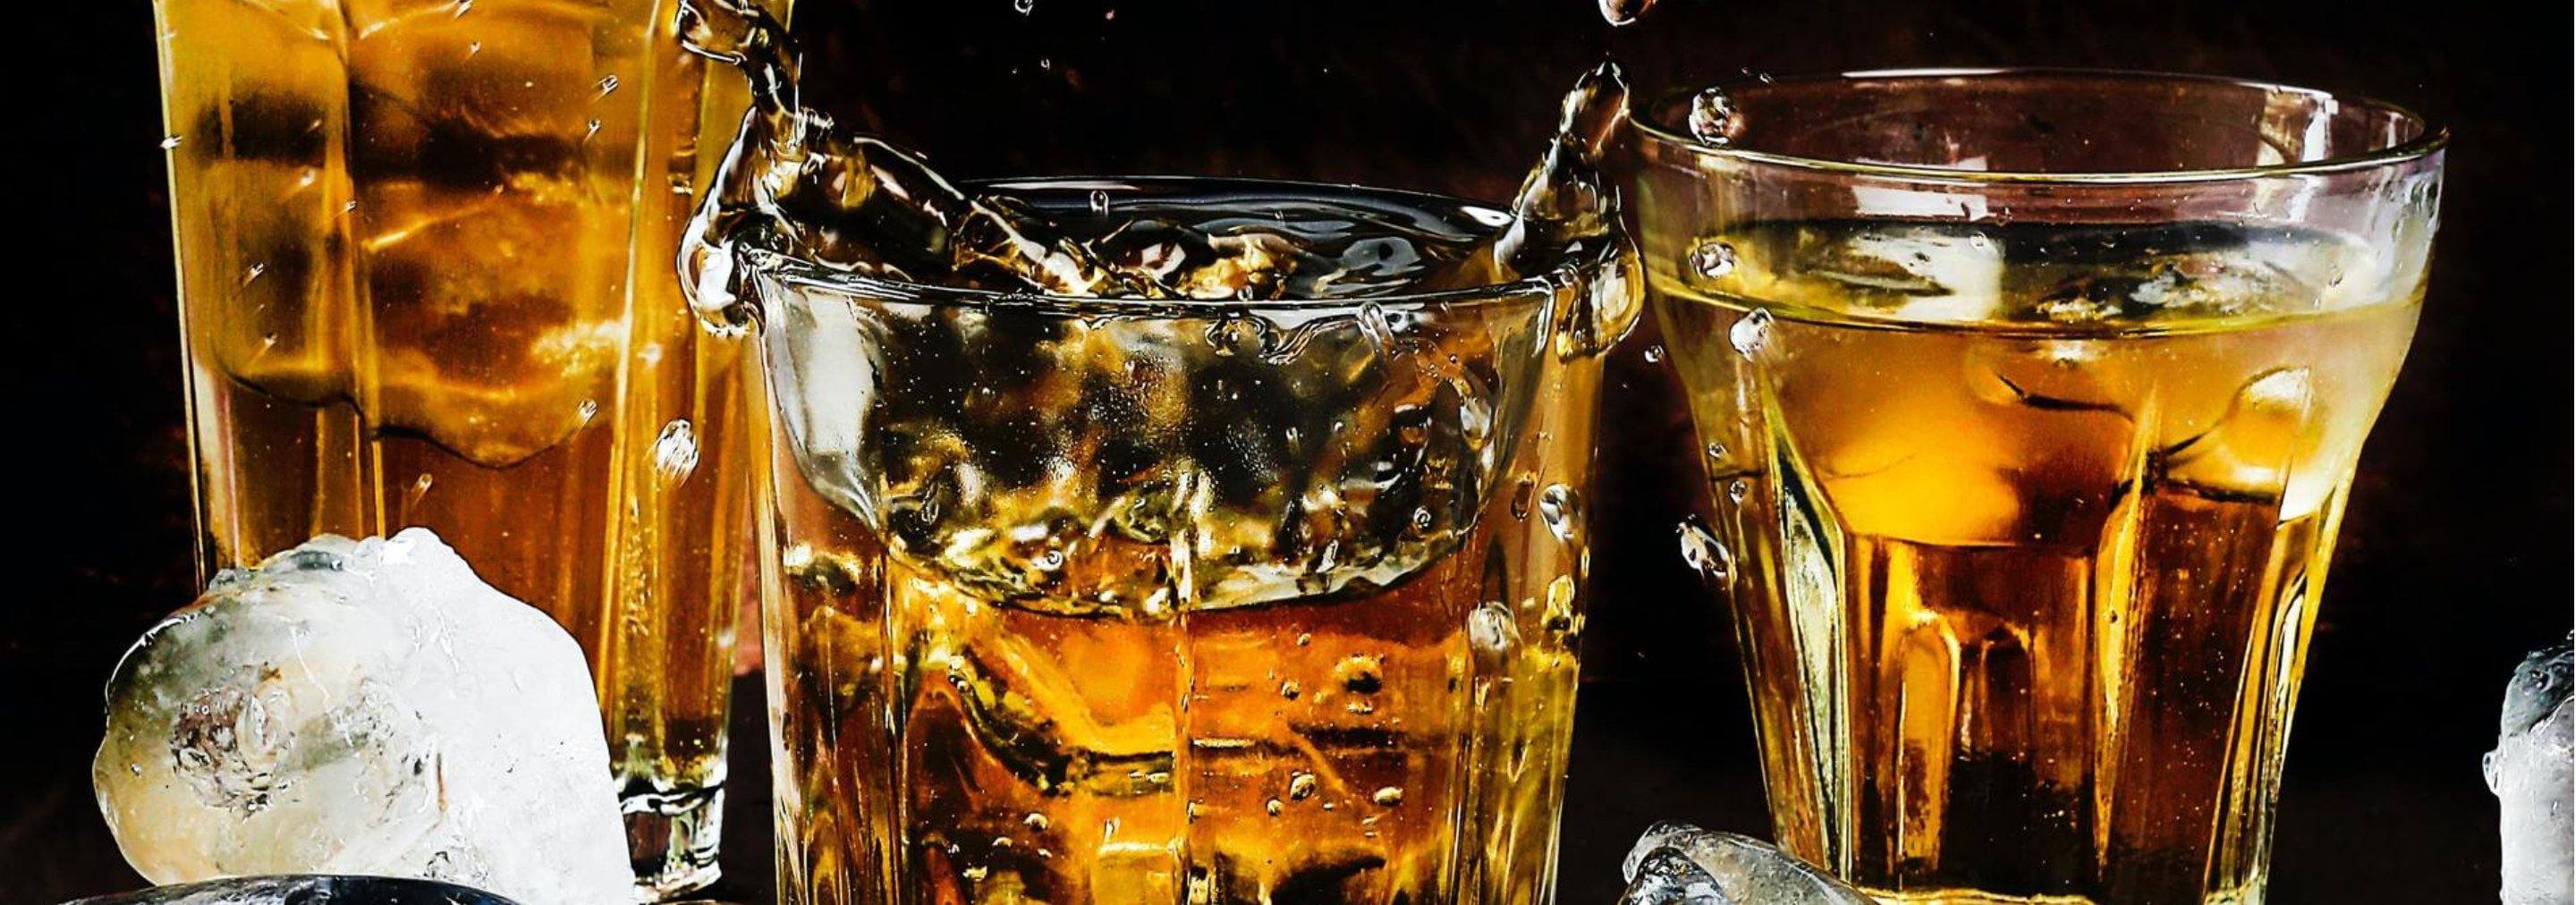 Whiskey Stones vs. Ice: Which is Better for Your Drink? - The Manual